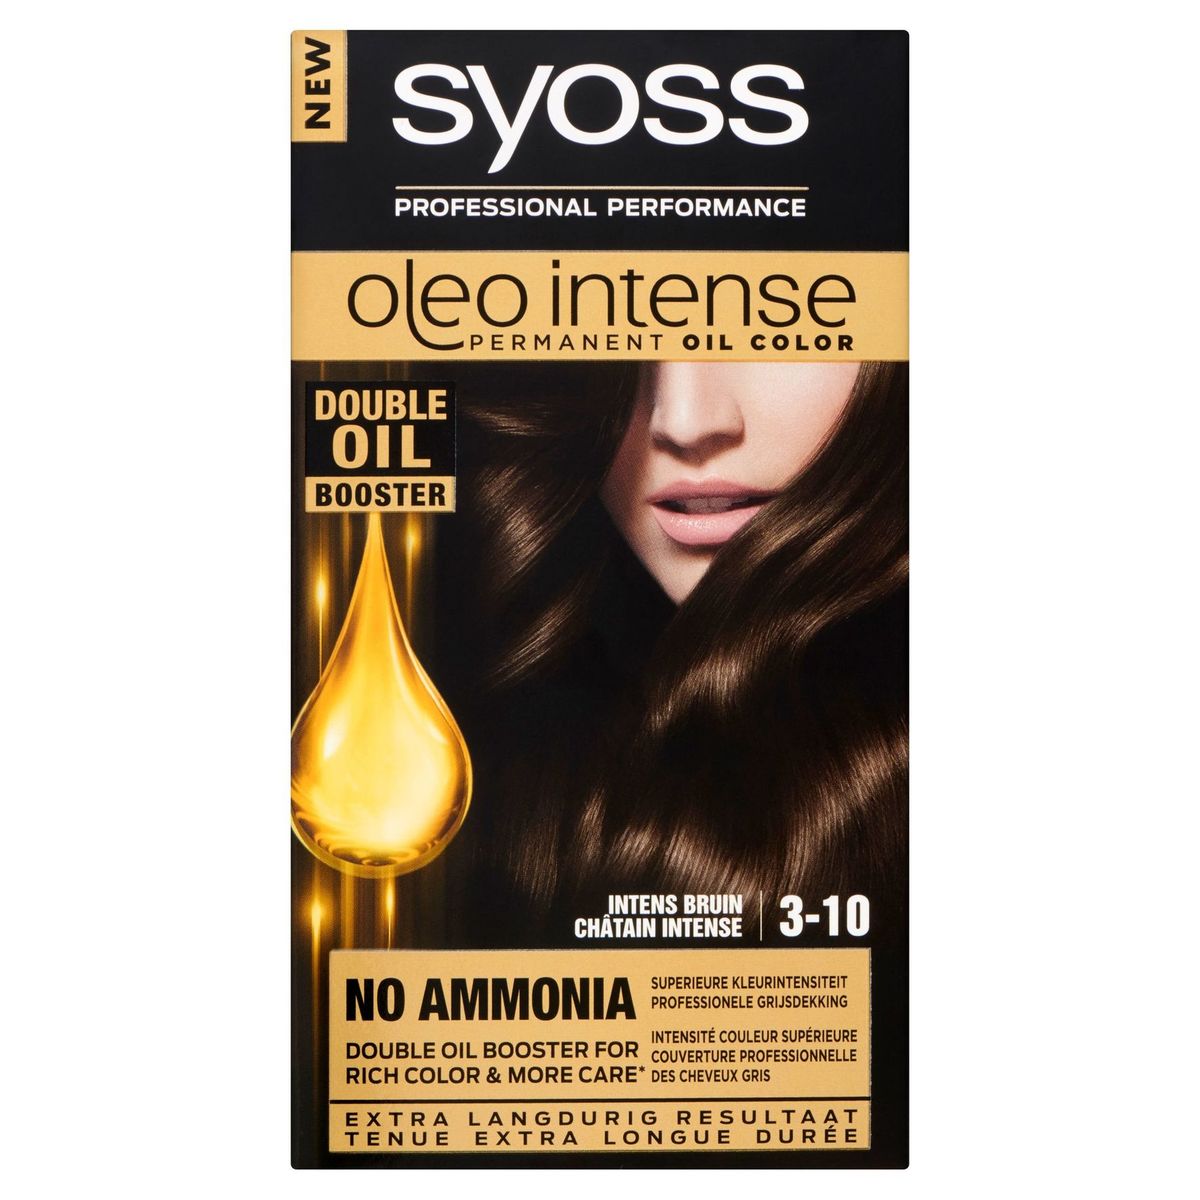 Syoss Oleo Intense Permanent Oil Color 3-10 Châtain Intense